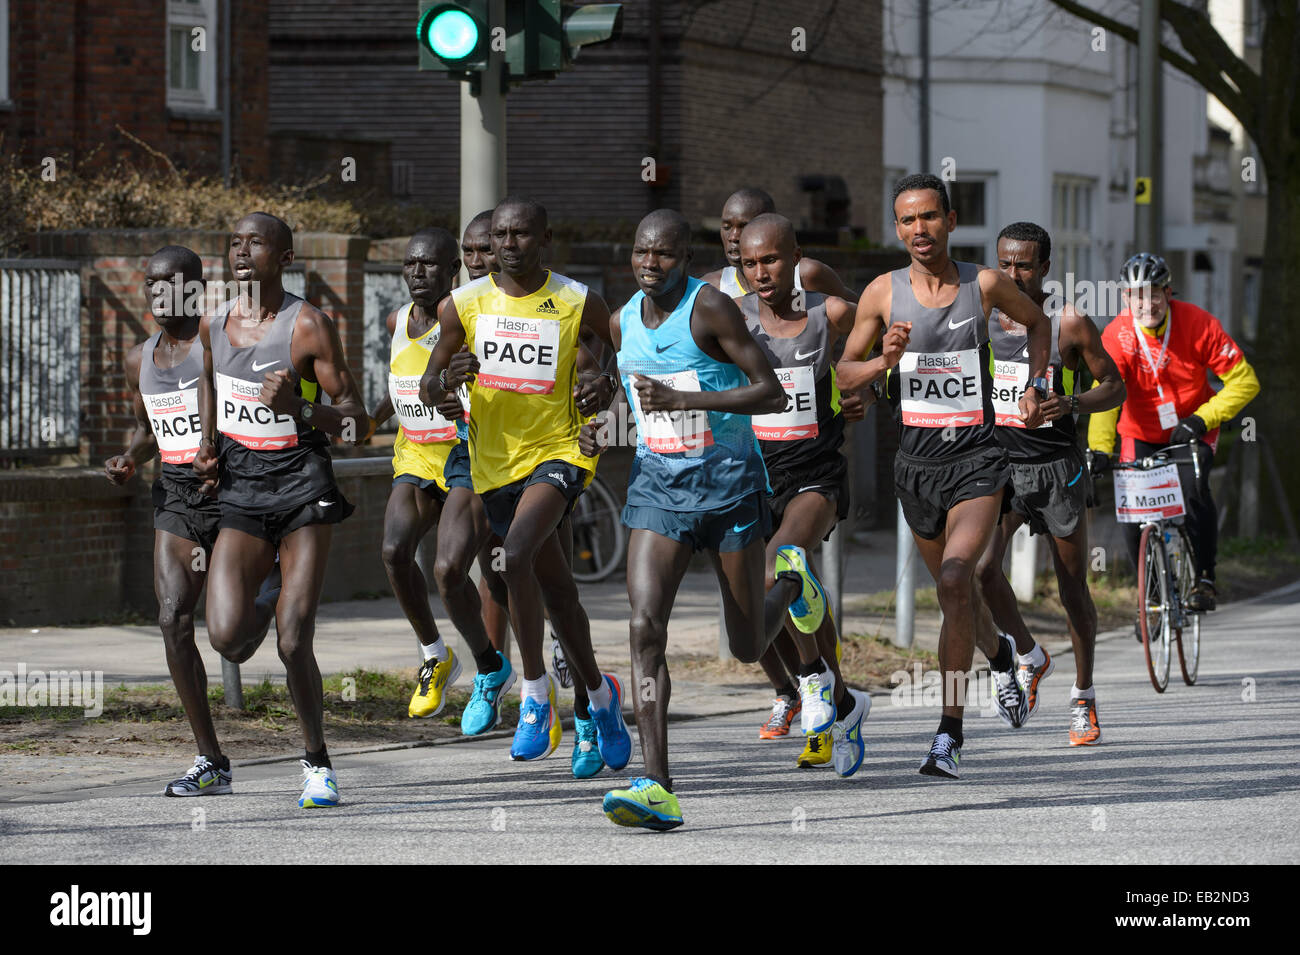 A group of pacemakers leading the elite runners at the Haspa Marathon 2013, Hamburg, Hamburg, Germany Stock Photo